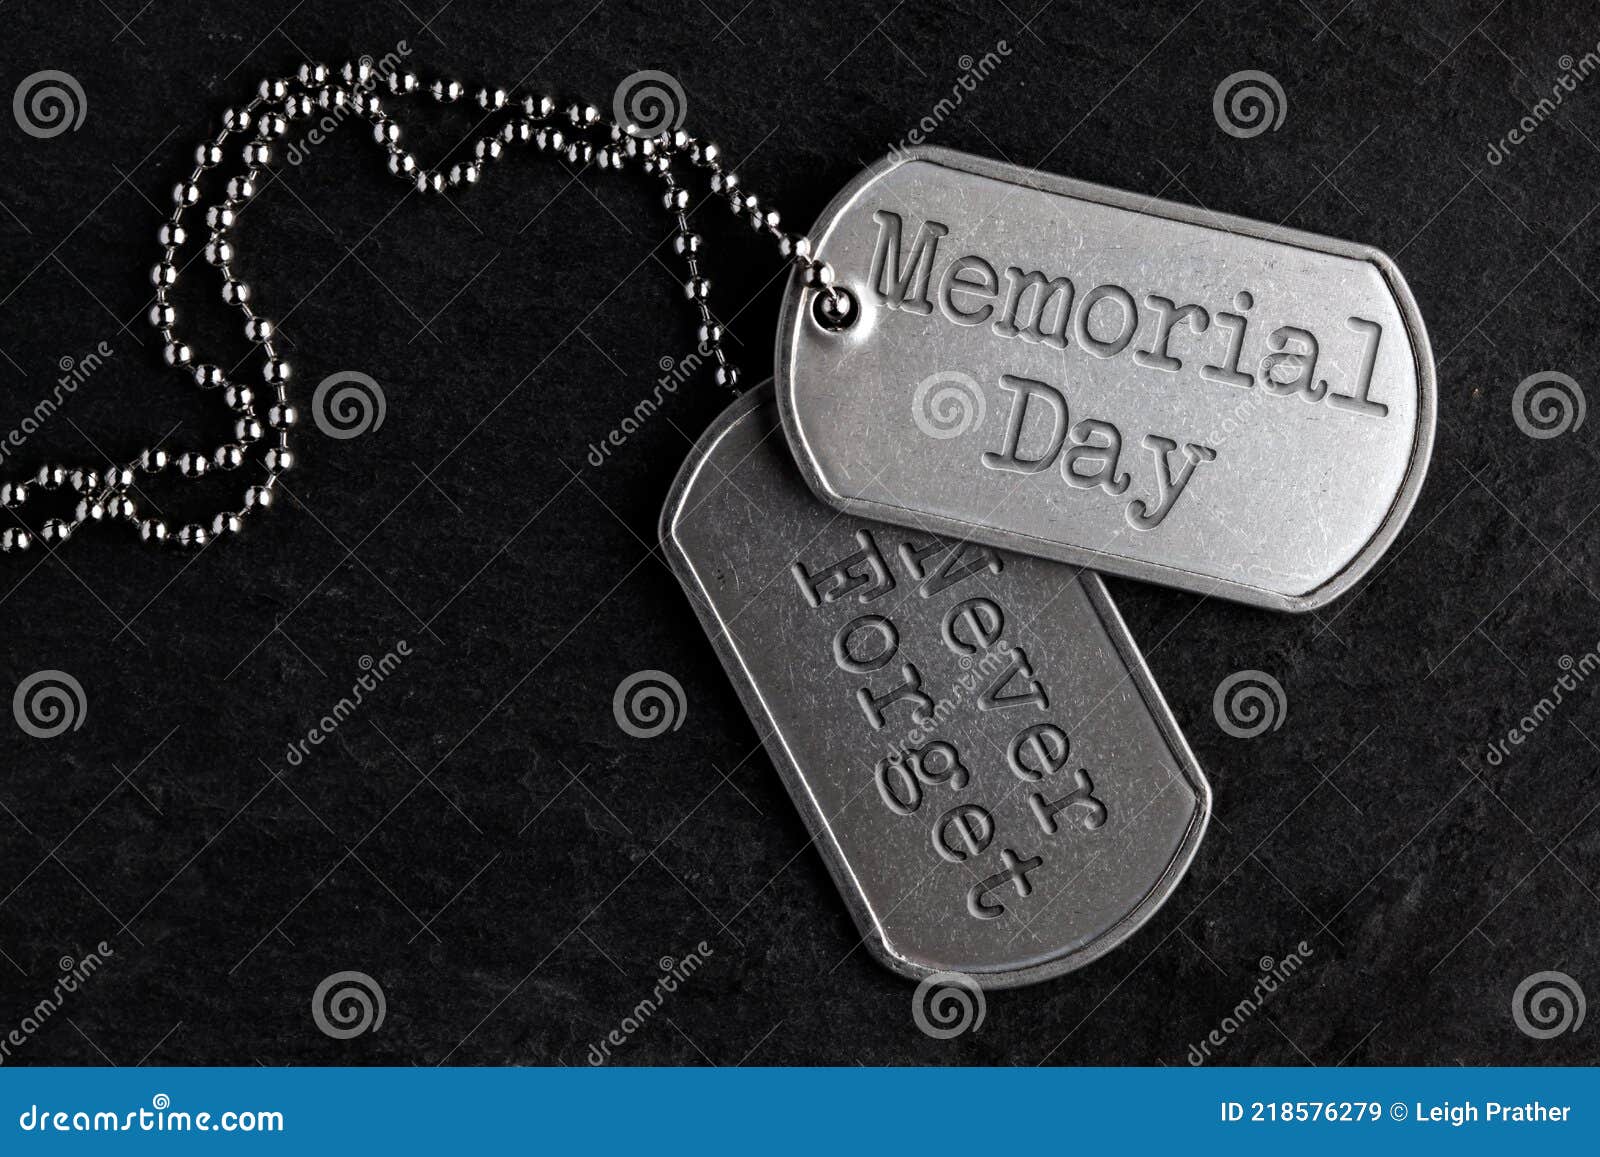 old military dog tags - memorial day, never forget